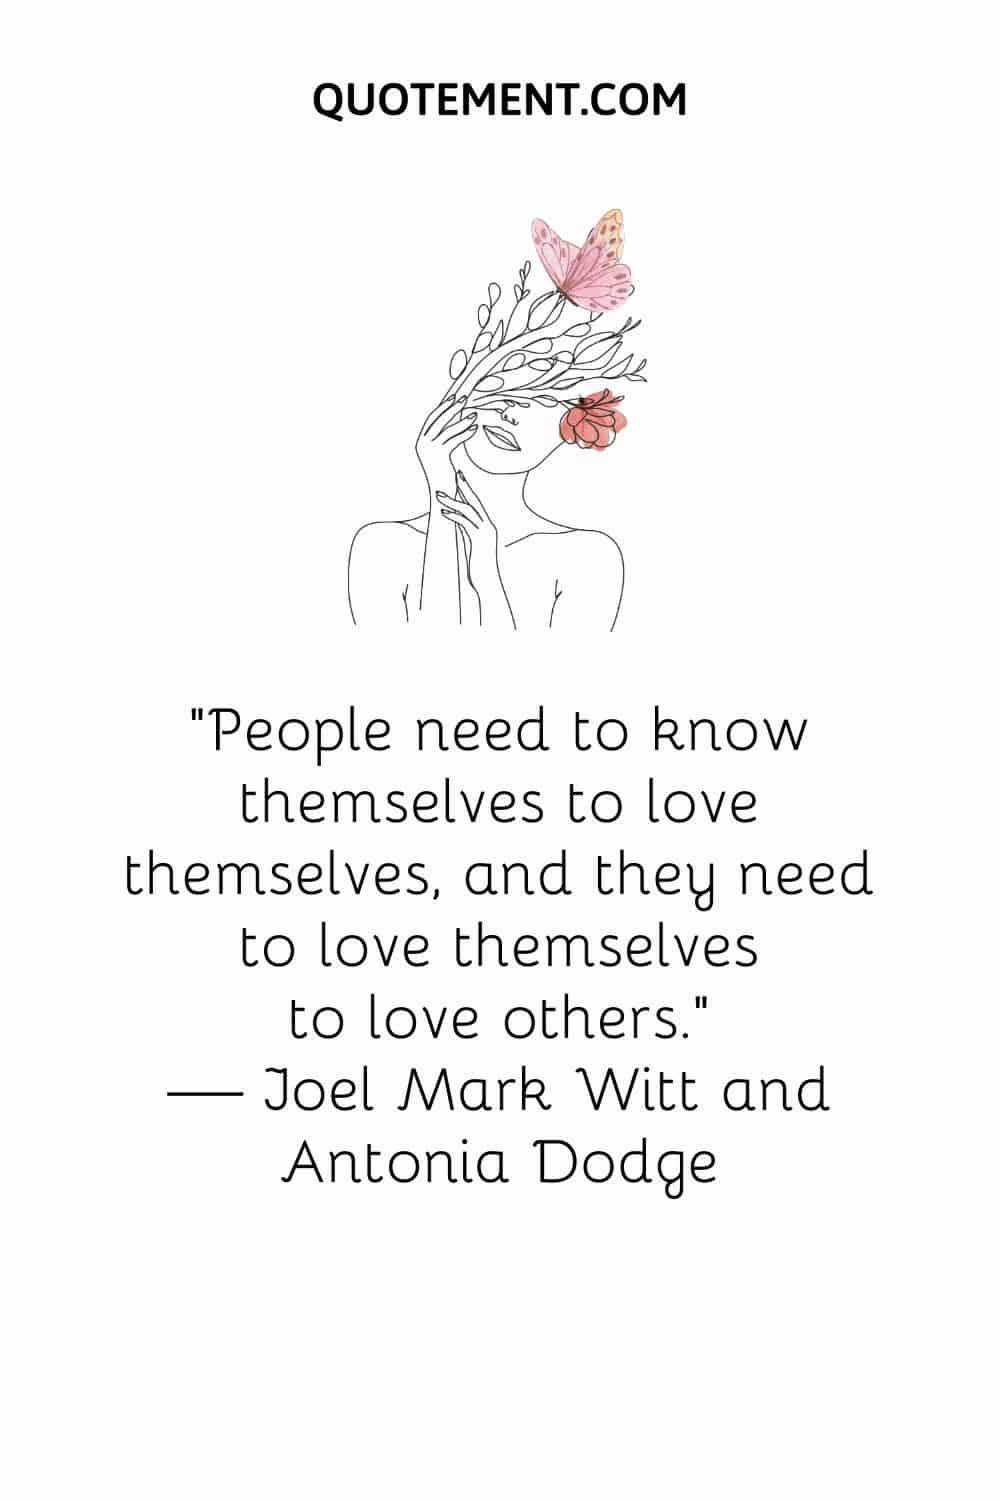 People need to know themselves to love themselves, and they need to love themselves to love others